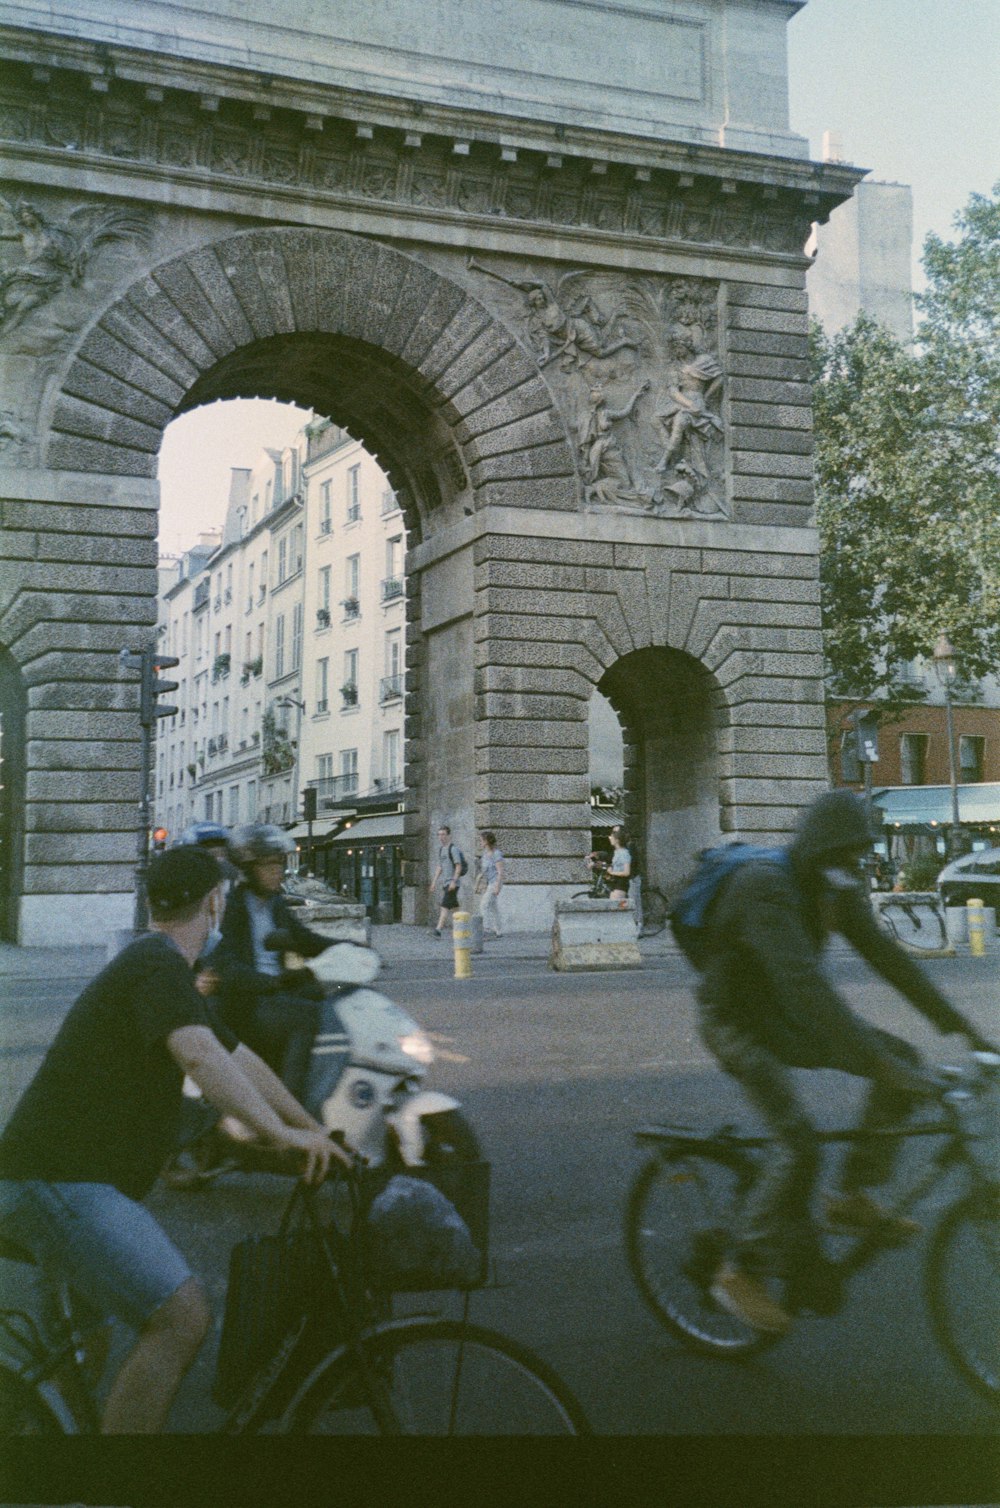 a group of people ride bikes under a stone arch